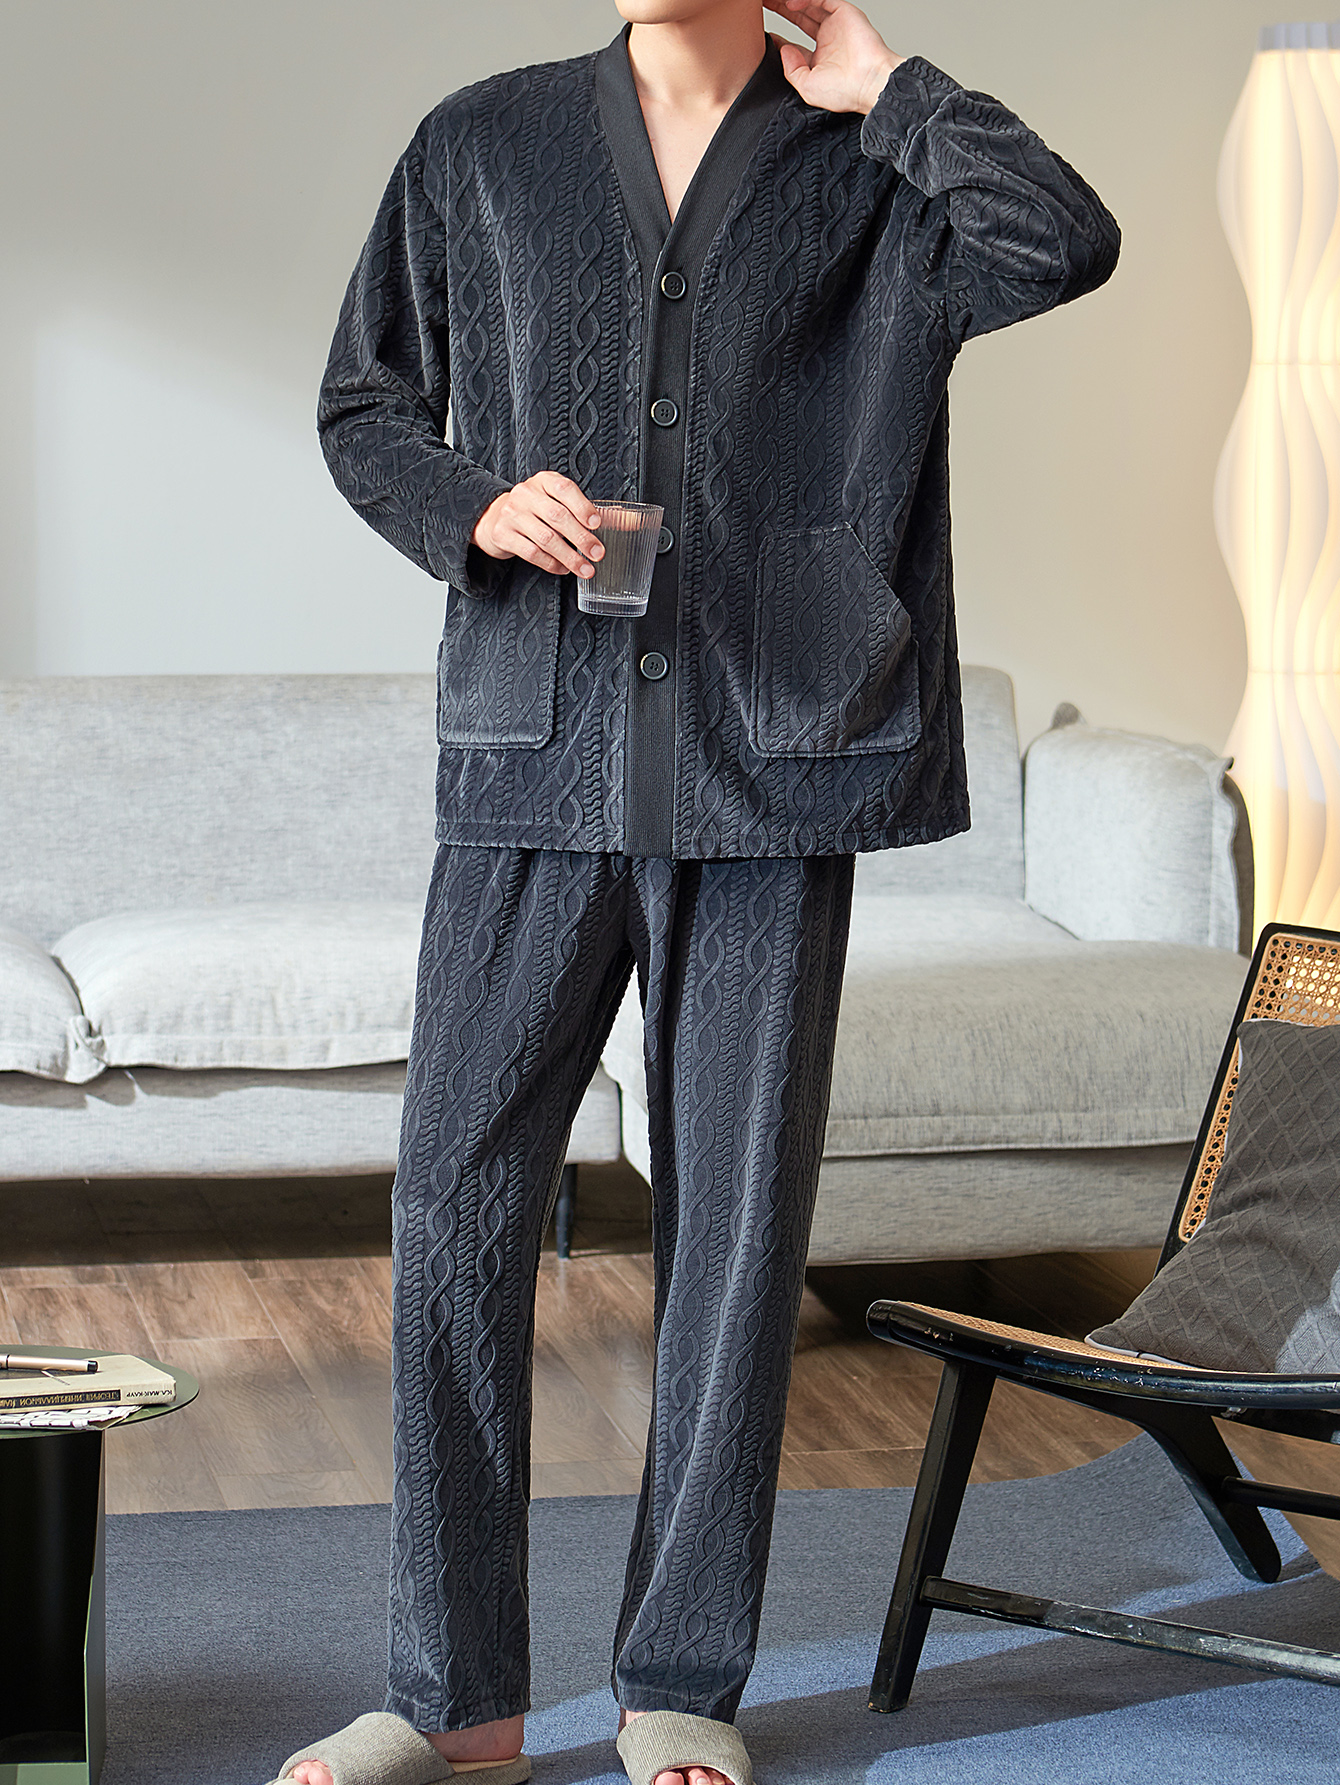 Men's Thermal Warm Thick Comfortable Pajama Sets With Pocket, Button Long  Sleeve Top & Pants, Men's Sleepwear Loungewear